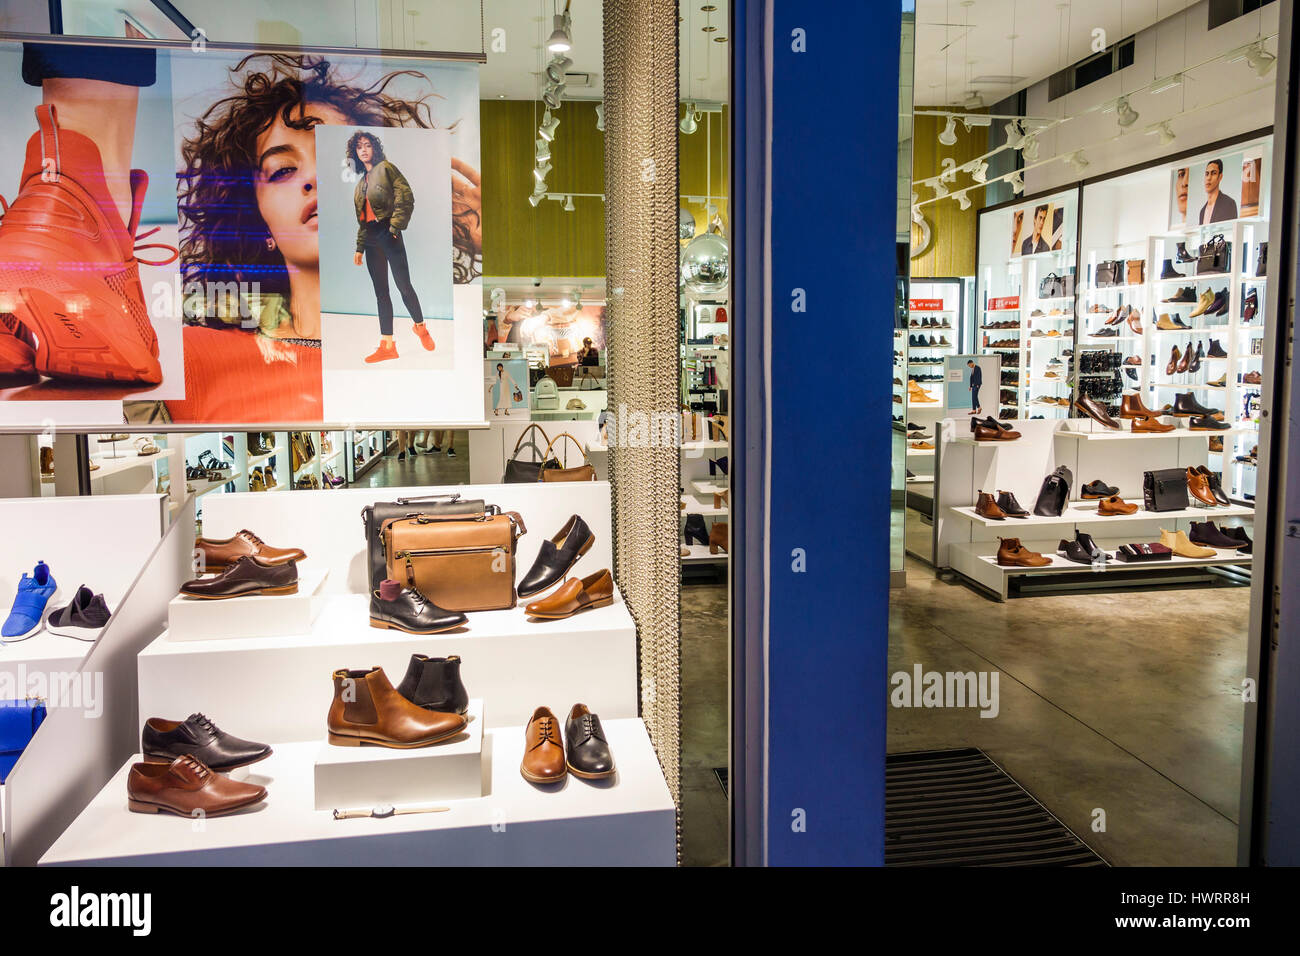 Aldo Shoes High Resolution Stock Photography and Images - Alamy